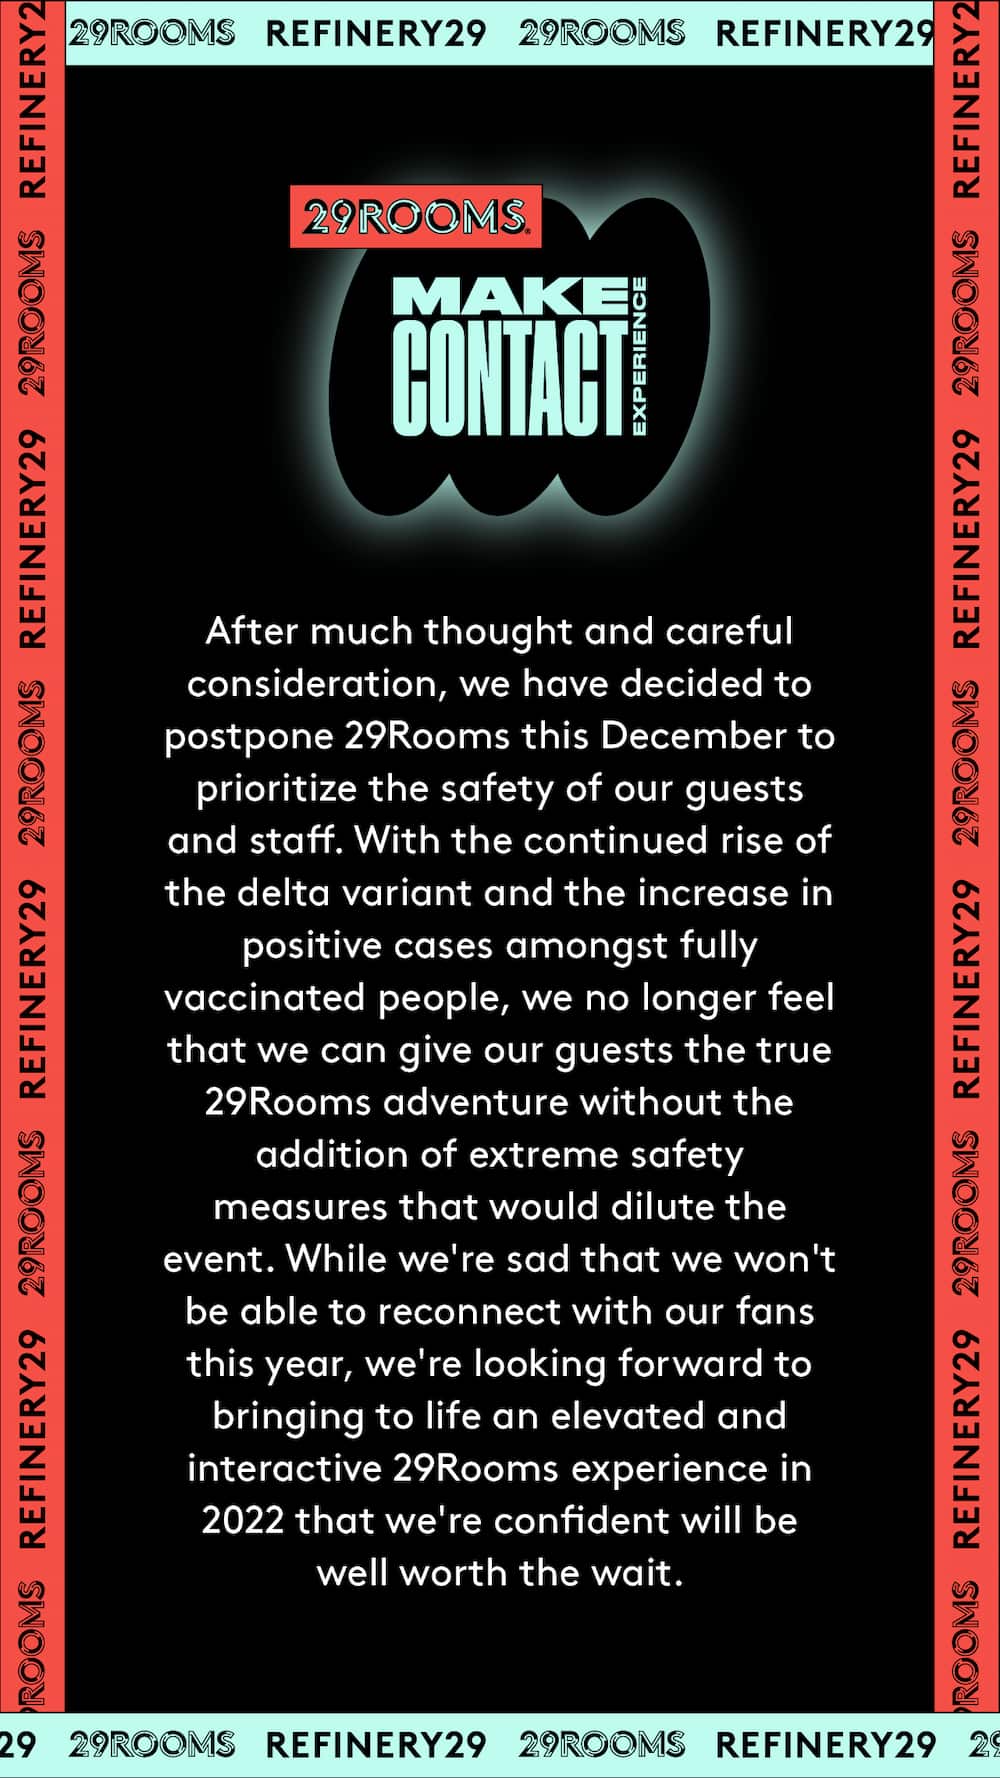 29Rooms Make Contact. After much thought and careful consideration, we have decided to postpone 29Rooms this December to prioritize the safety of our guests and staff. With the continued rise of the delta variant and the increase in positive cases amongst fully vaccinated people, we no longer feel that we can give our guests the true 29Rooms adventure without the addition of extreme safety measures that would dilute the event. While we're sad that we won't be able to reconnect with our fans this year, we're looking forward to bringing to life an elevated and interactive 29Rooms experience in 2022 that we're confident will be well worth the wait.